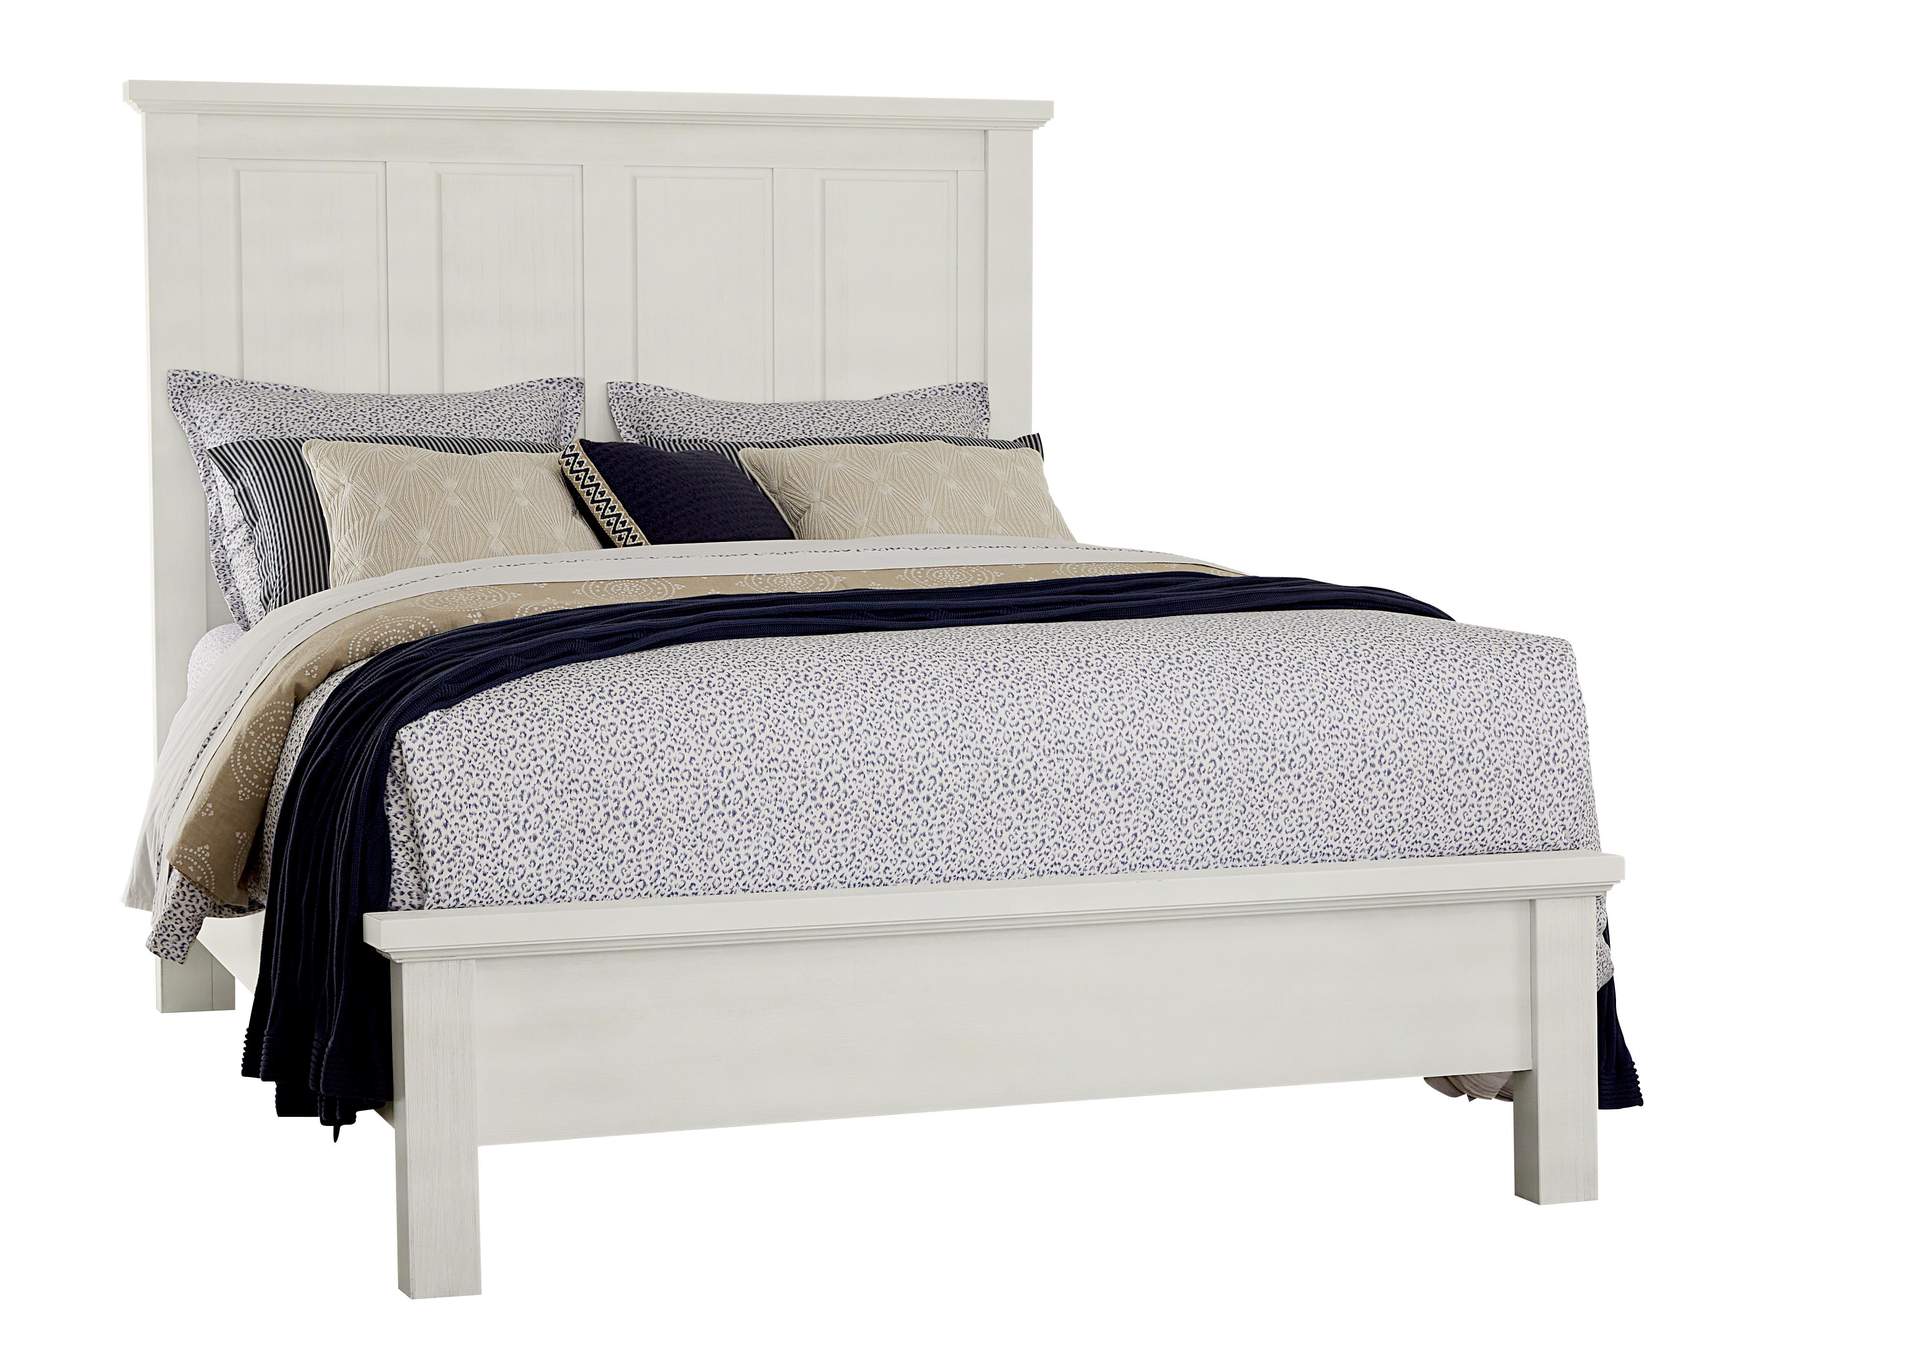 Maple Road-Two Tone Queen Mansion Bed,Vaughan-Bassett